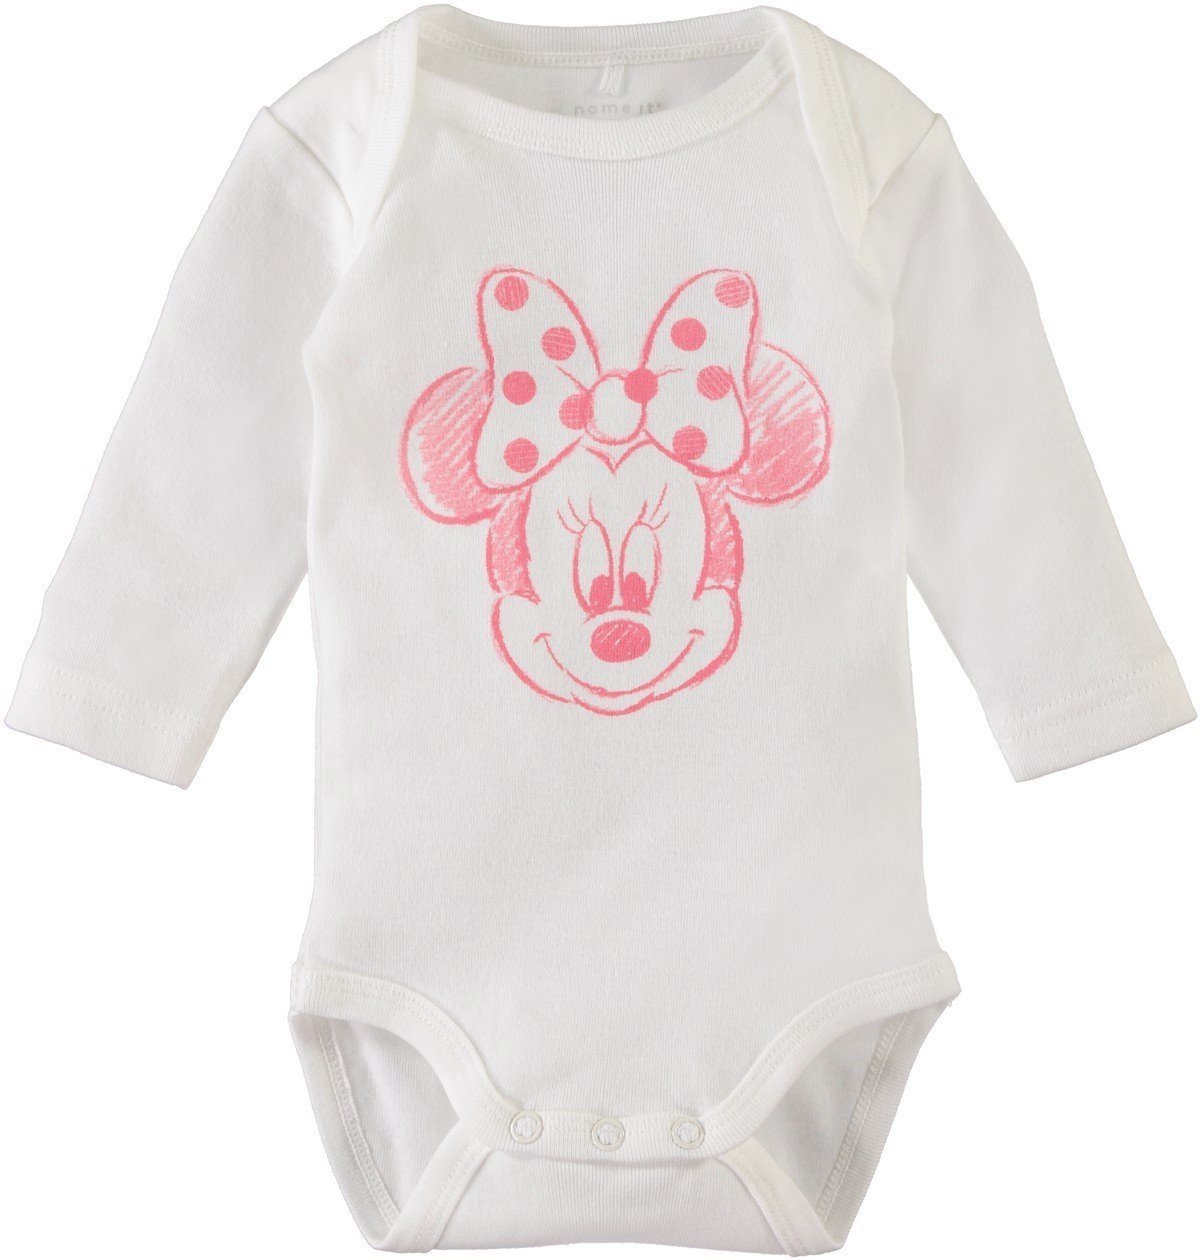 Name it Baby Girl 2-Pack Minnie Mouse Long Sleeved Cotton Romper Bodysuits WHITE FRONT